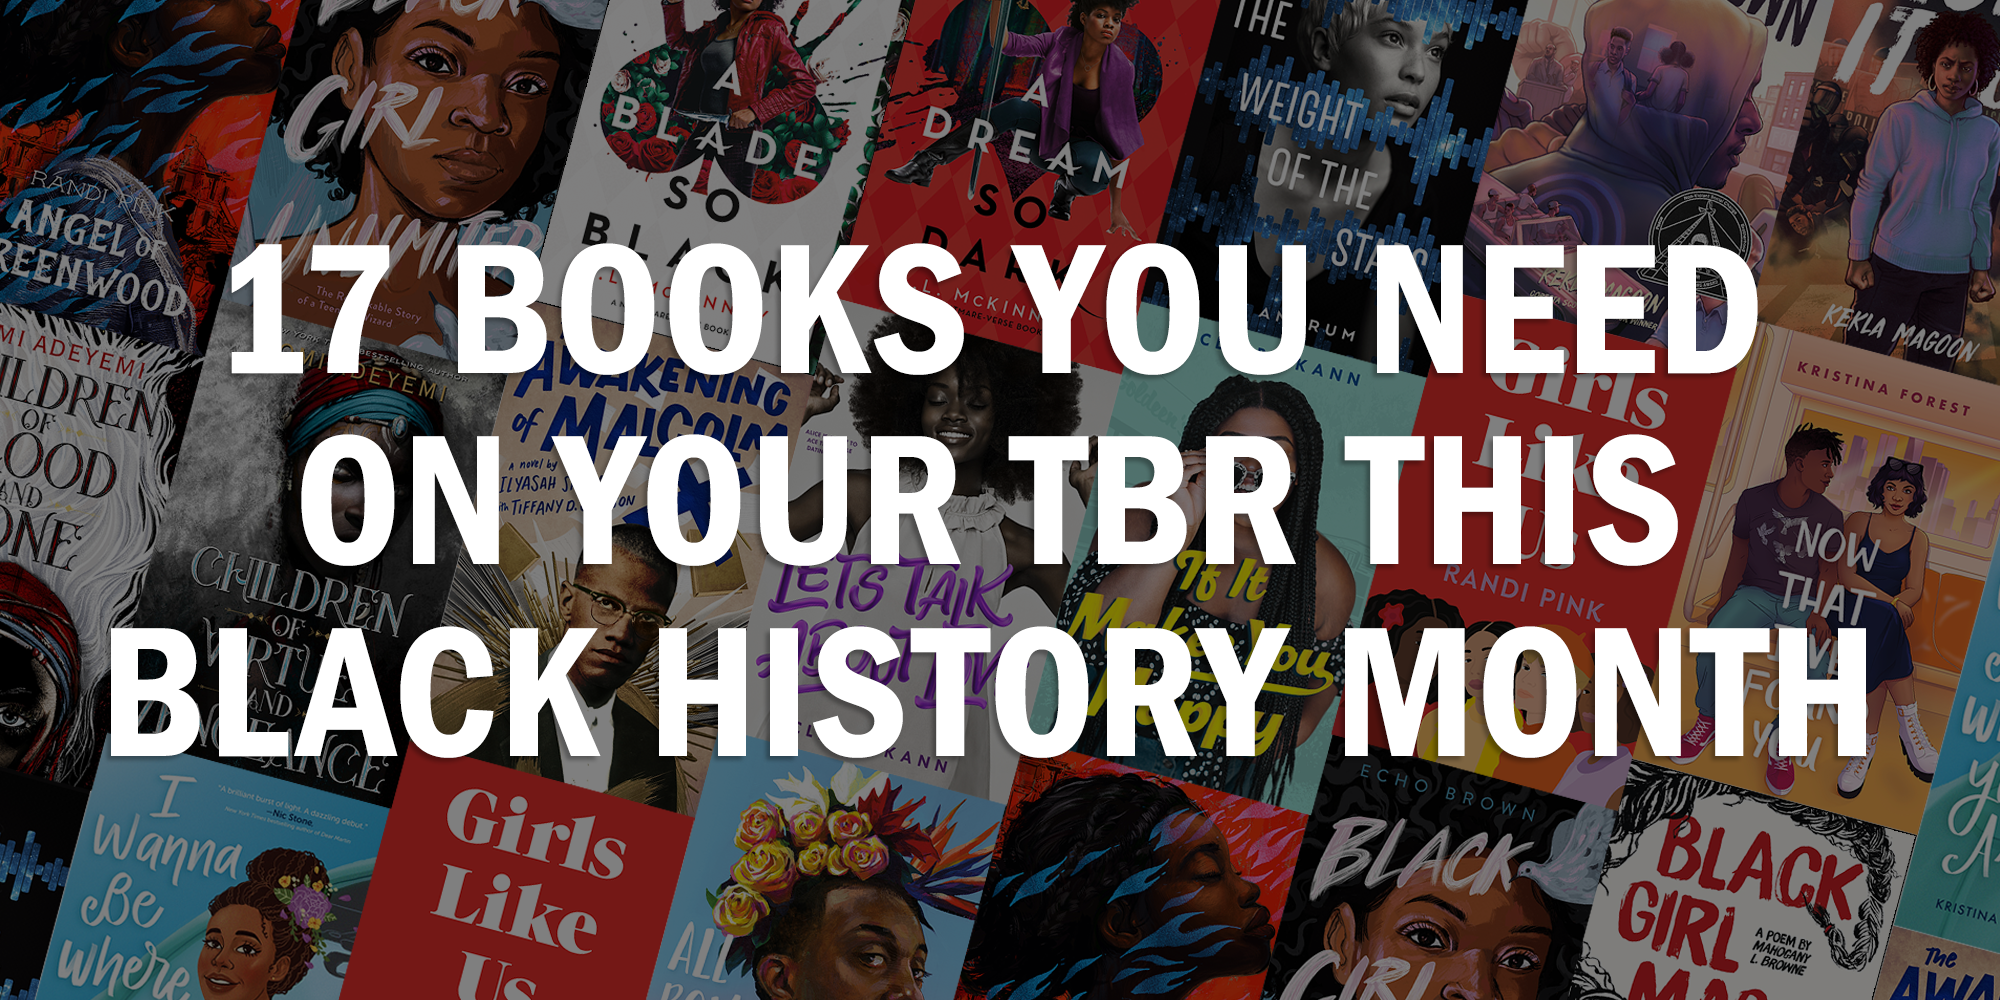 17 Books You Need on Your TBR This Black History Month